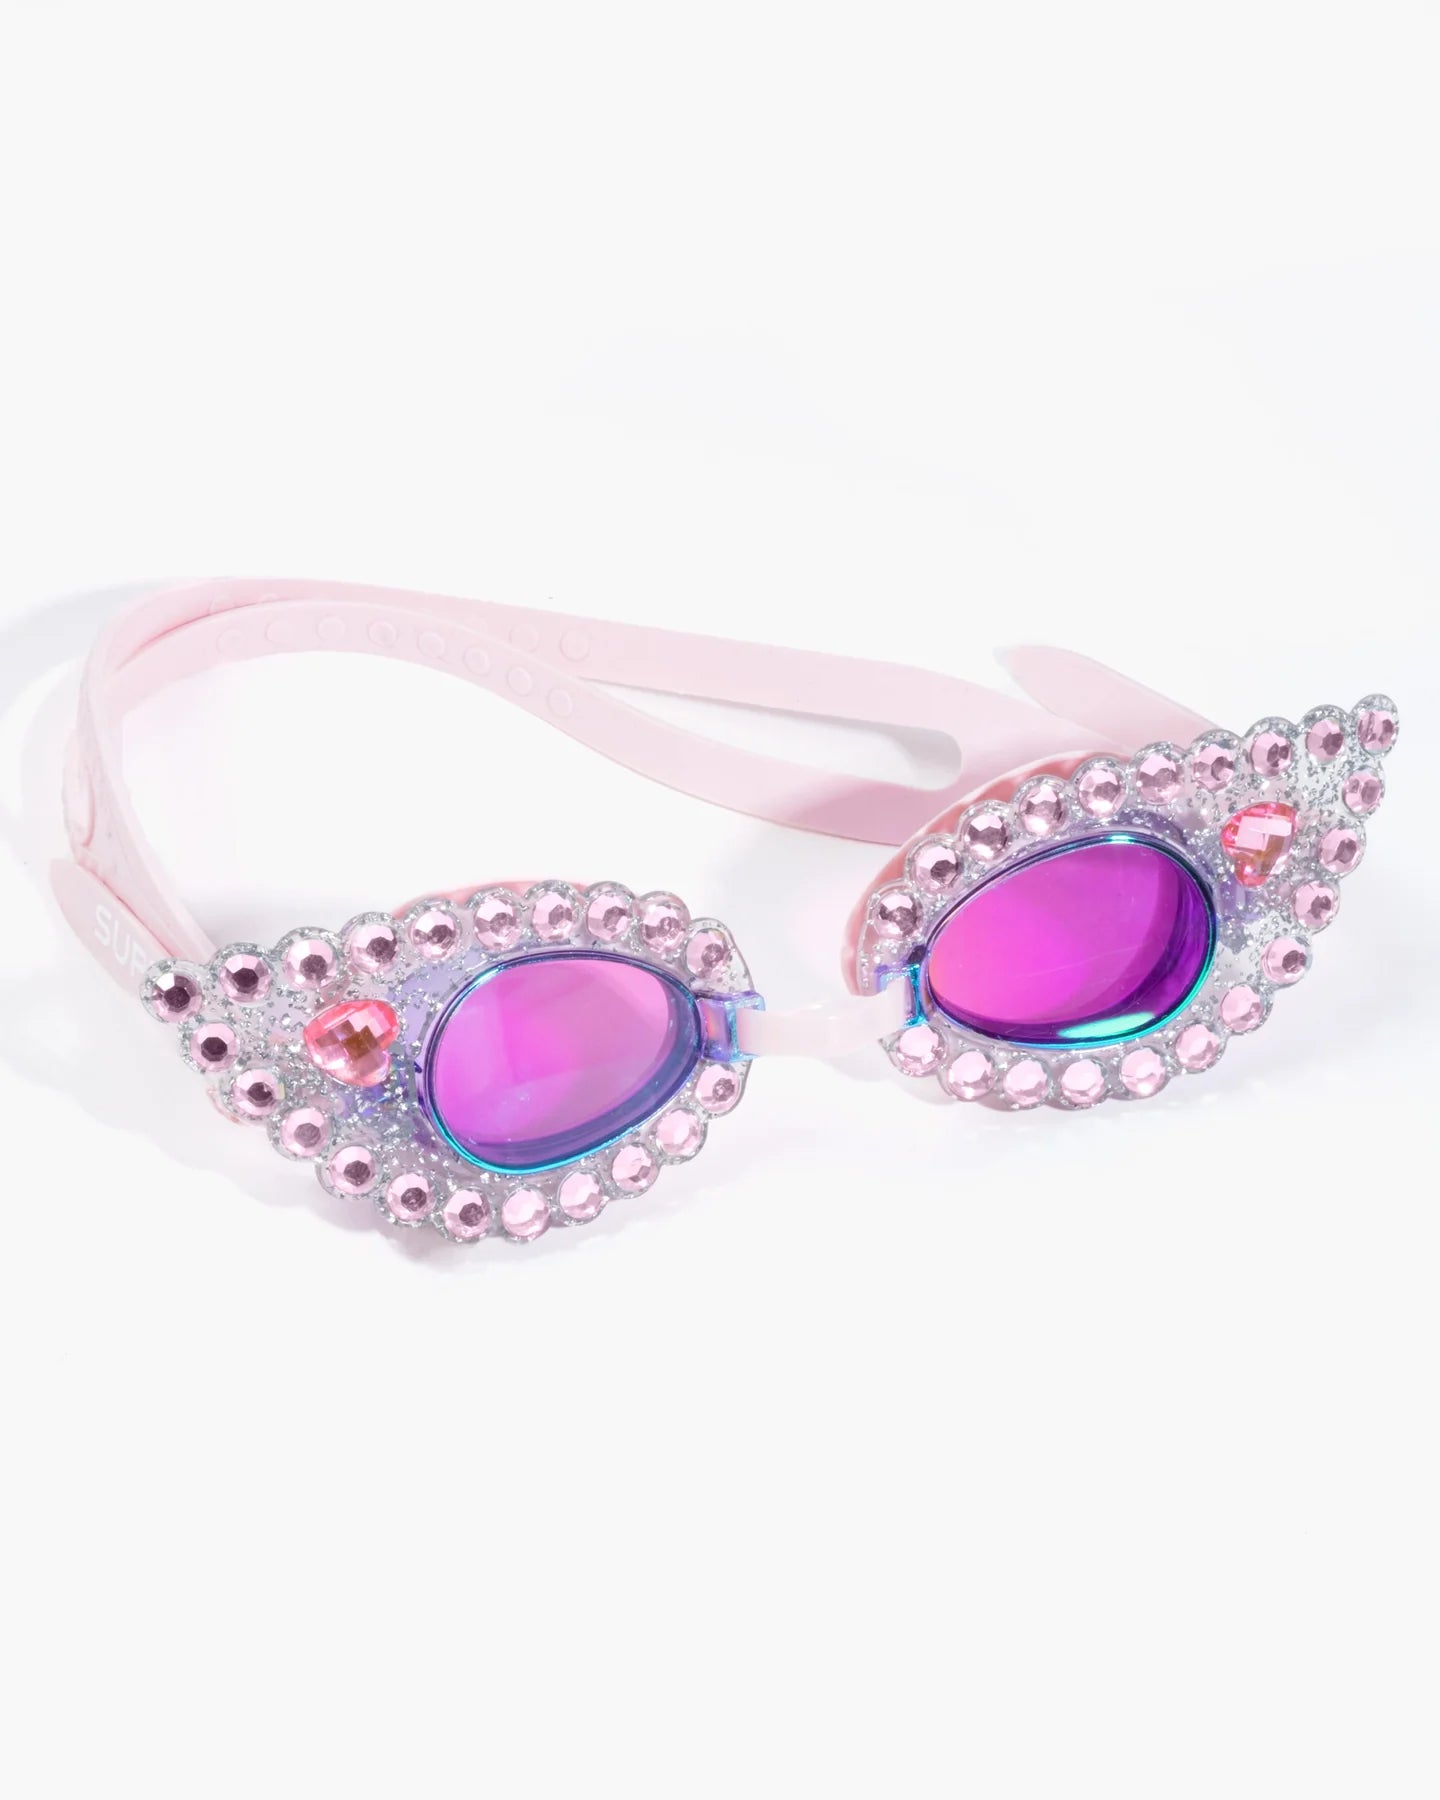 No more sitting pretty poolside, our Super Smalls Pink Splash Goggles will take your swim skills and sparkly style underwater! Our best-selling kid's goggles feature glittery frames covered in pink gems, plus SUPER cool iridescent lenses for the ultimate vacation statement. With it's UV protection lens, watertight seal and a comfy adjustable strap, you’ll be ready to make a SPLASH.  *Small parts, not intended for children under 3 years.